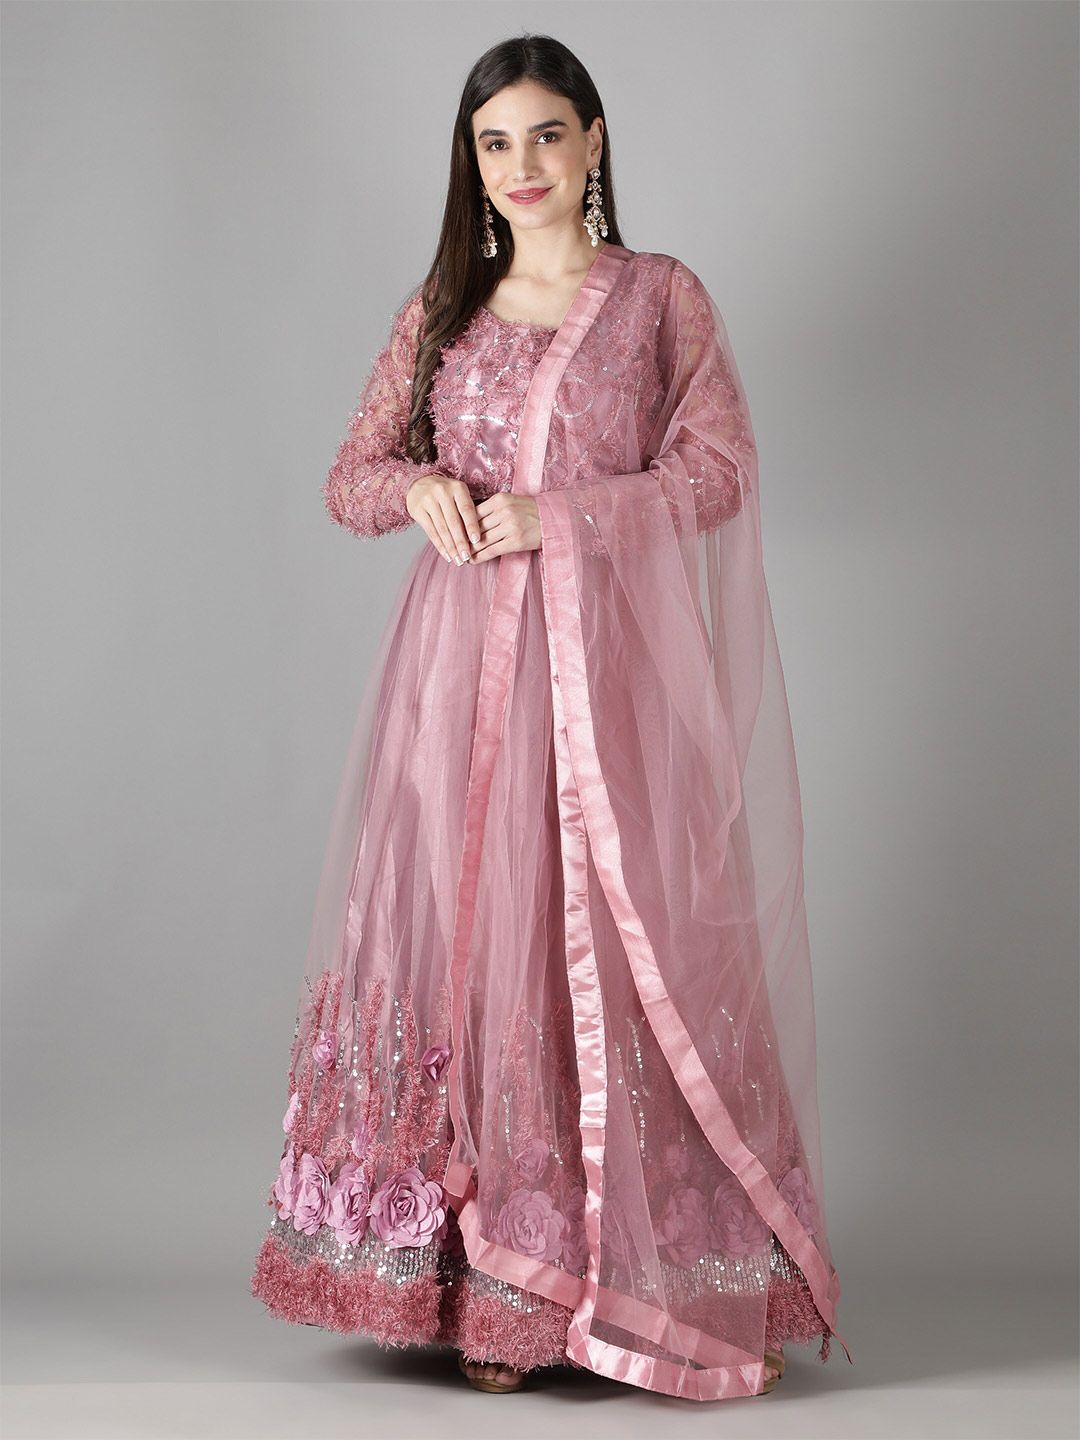 Bollyclues Pink & Gold-Toned Embellished Semi-Stitched Lehenga & Unstitched Blouse With Dupatta Price in India